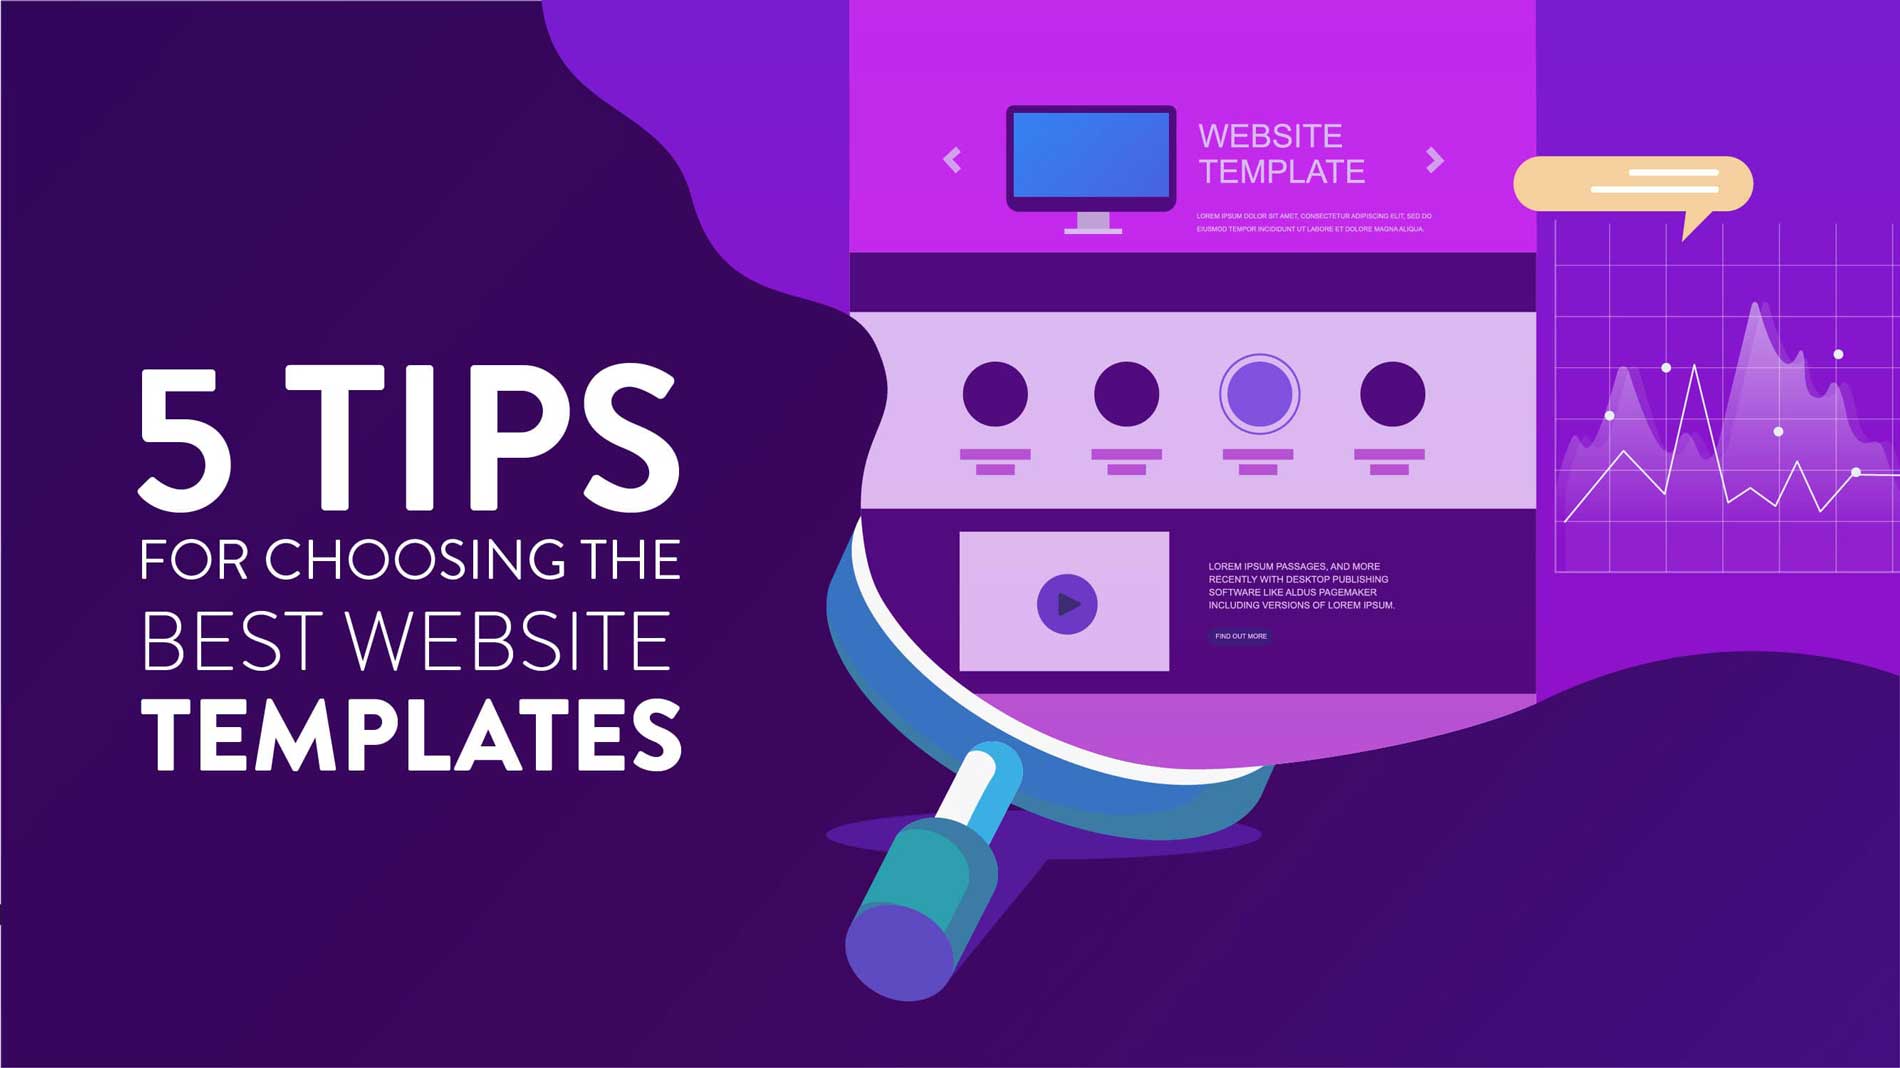 5 tips to choose the best website template